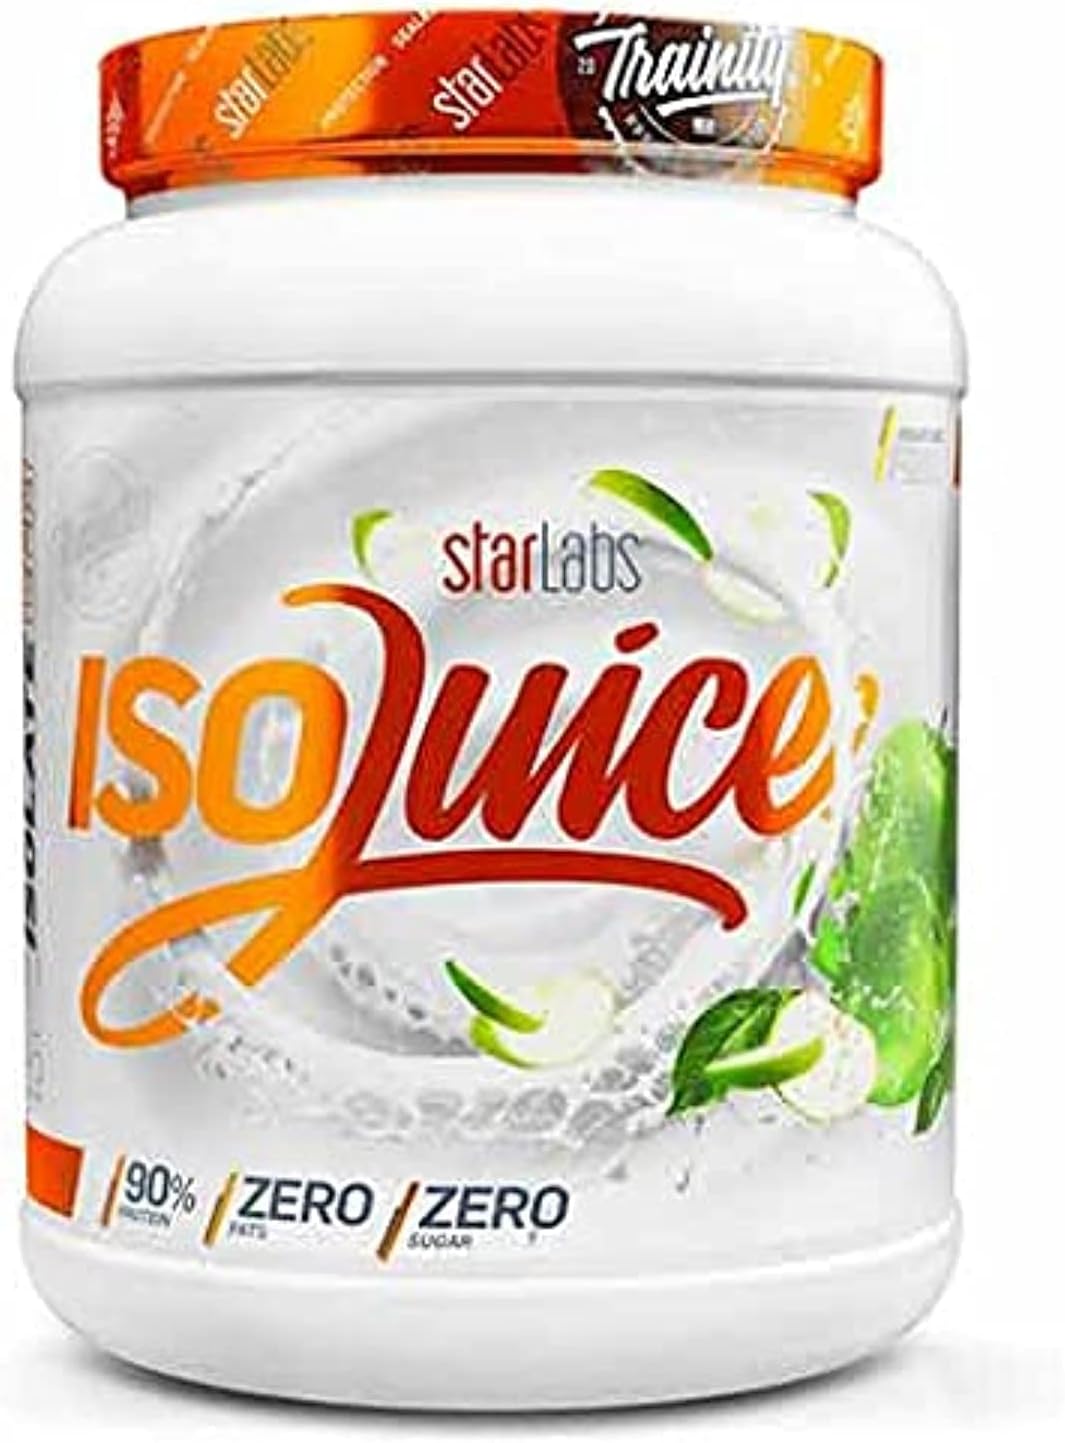 STARLABS Iso Juice Green Apple Isolate Protein - 45 Servings